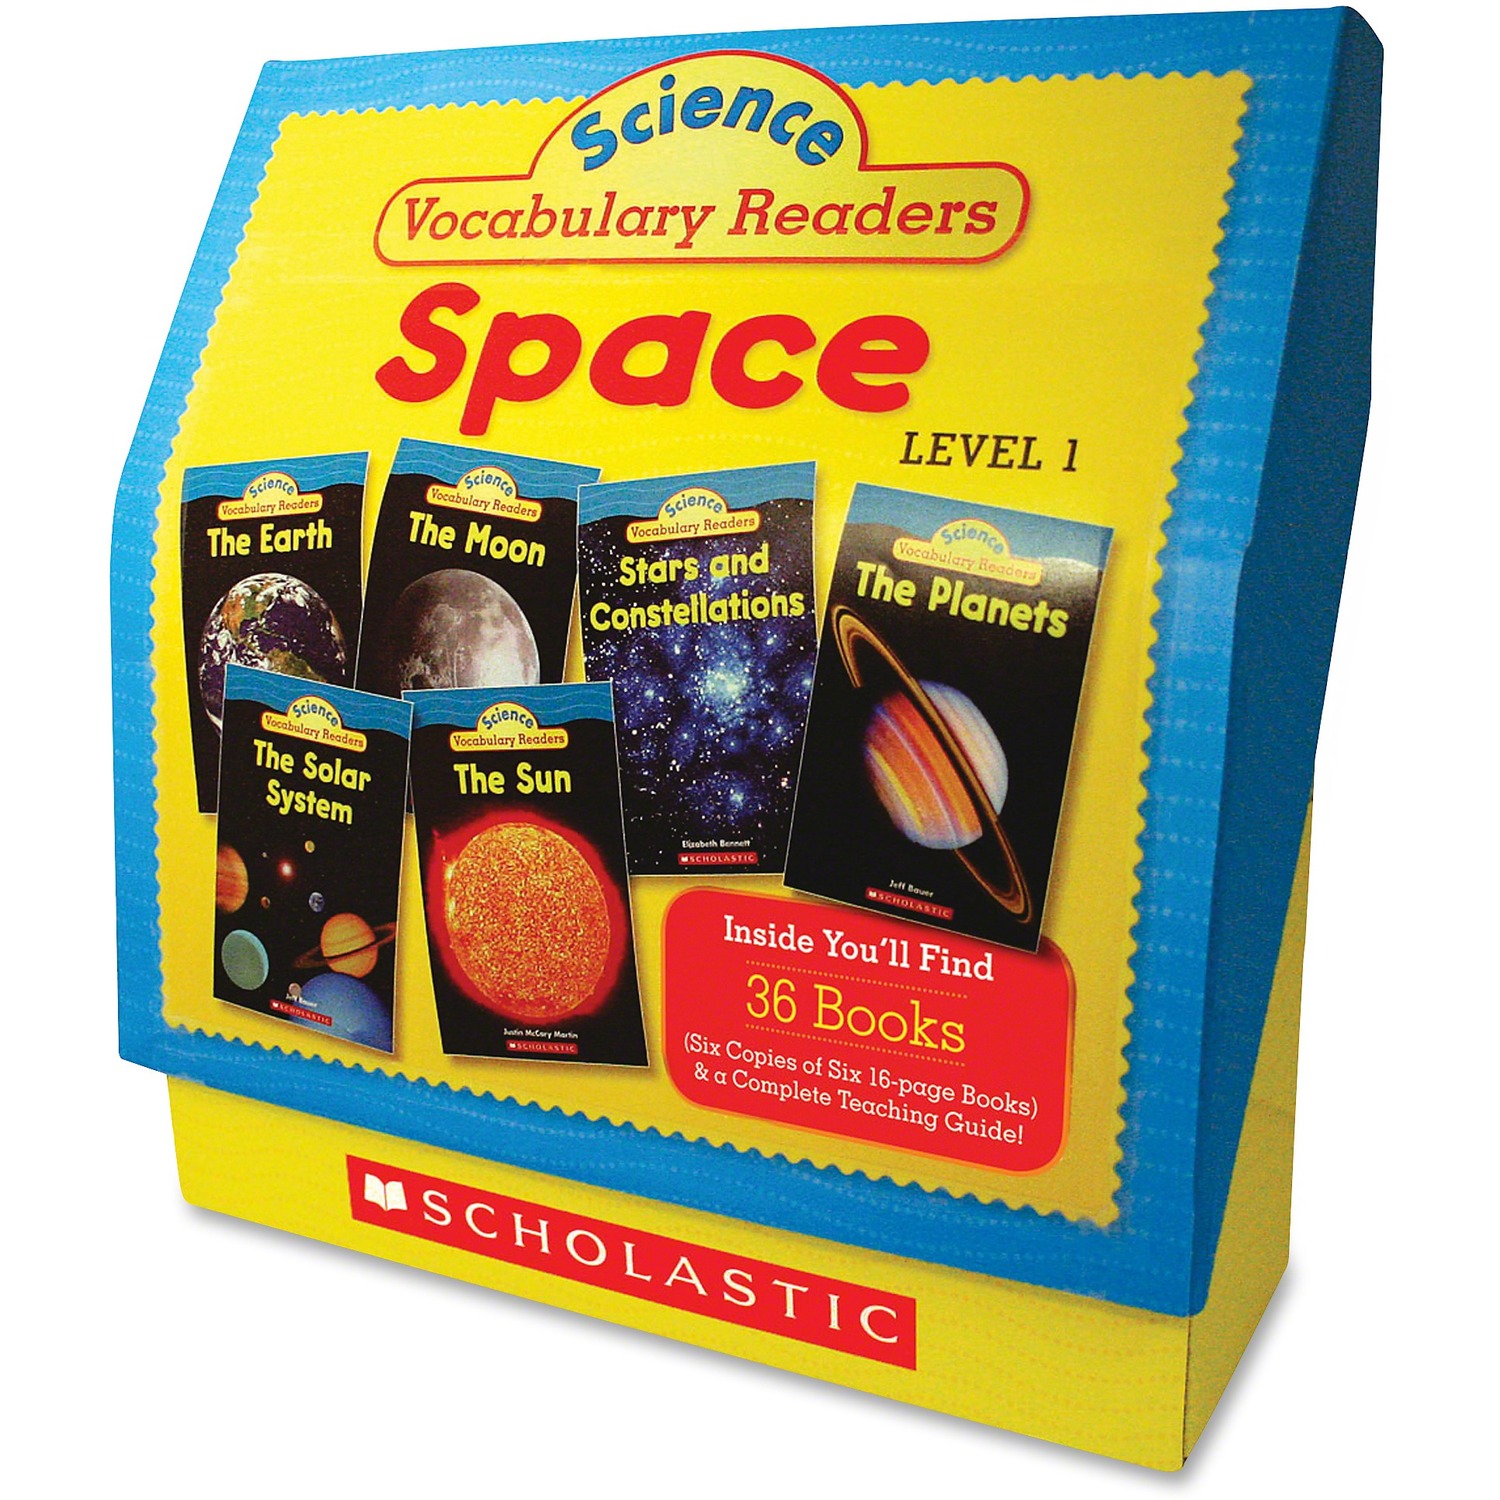 scholastic-science-vocabulary-readers-space-lvl-1-128pgs-multi